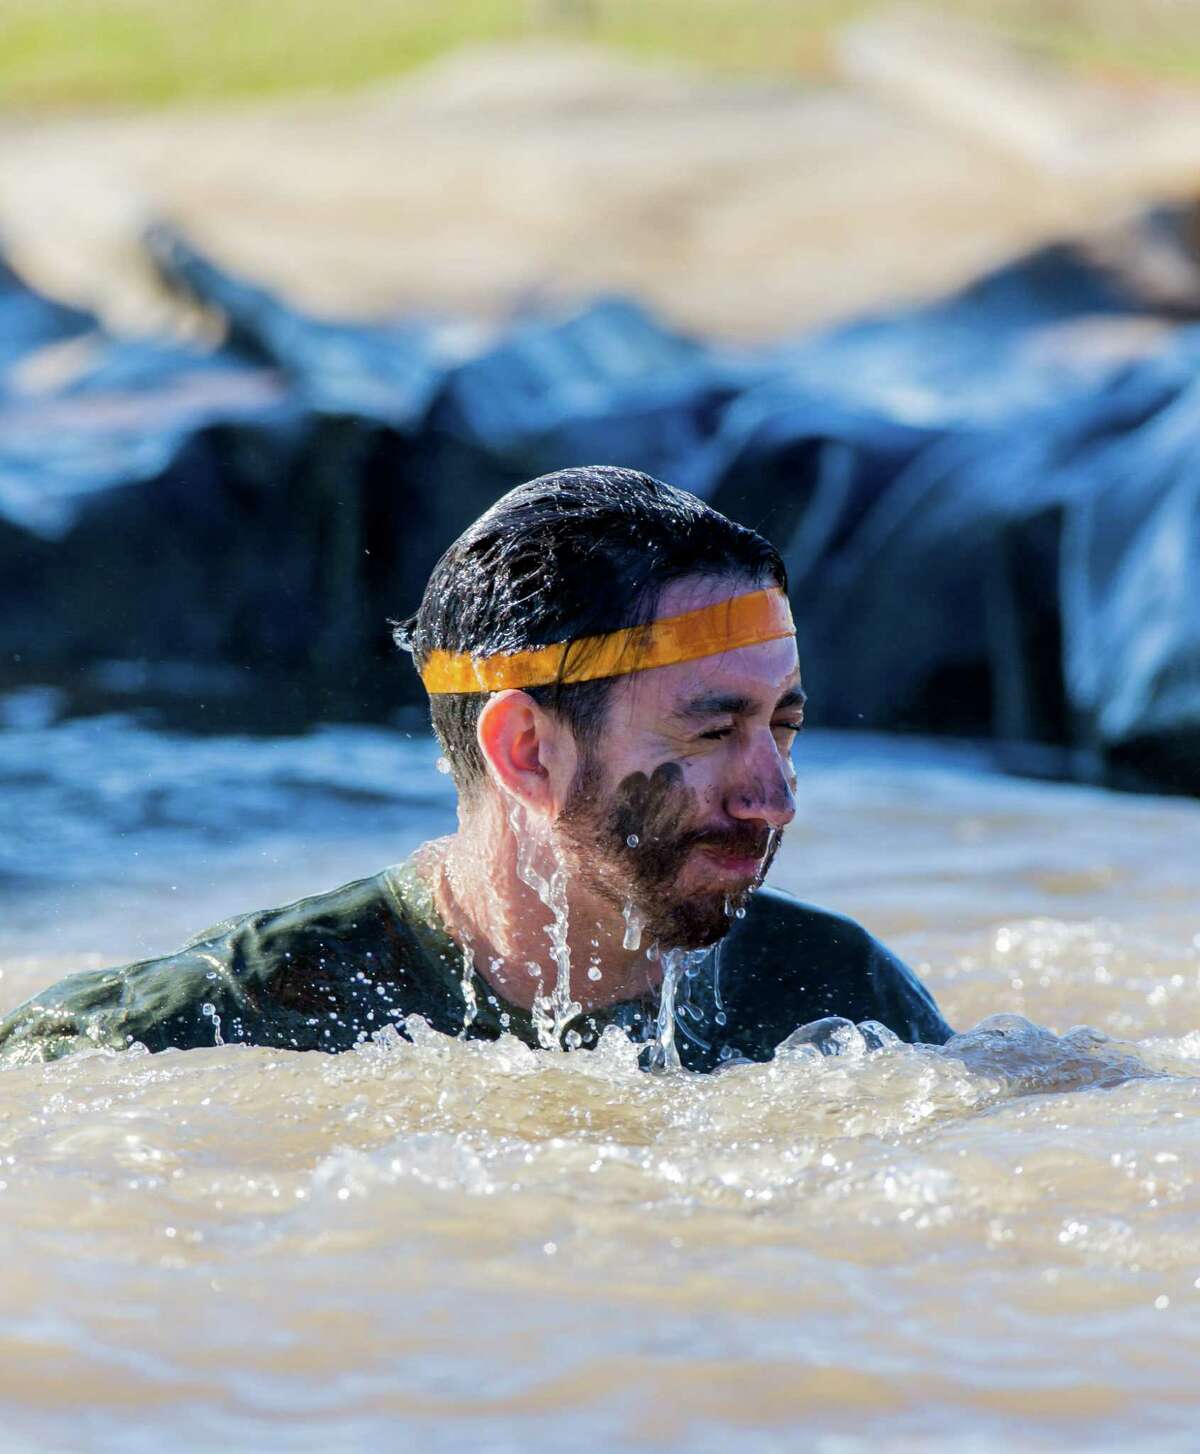 Muddy obstacle course proves challenging